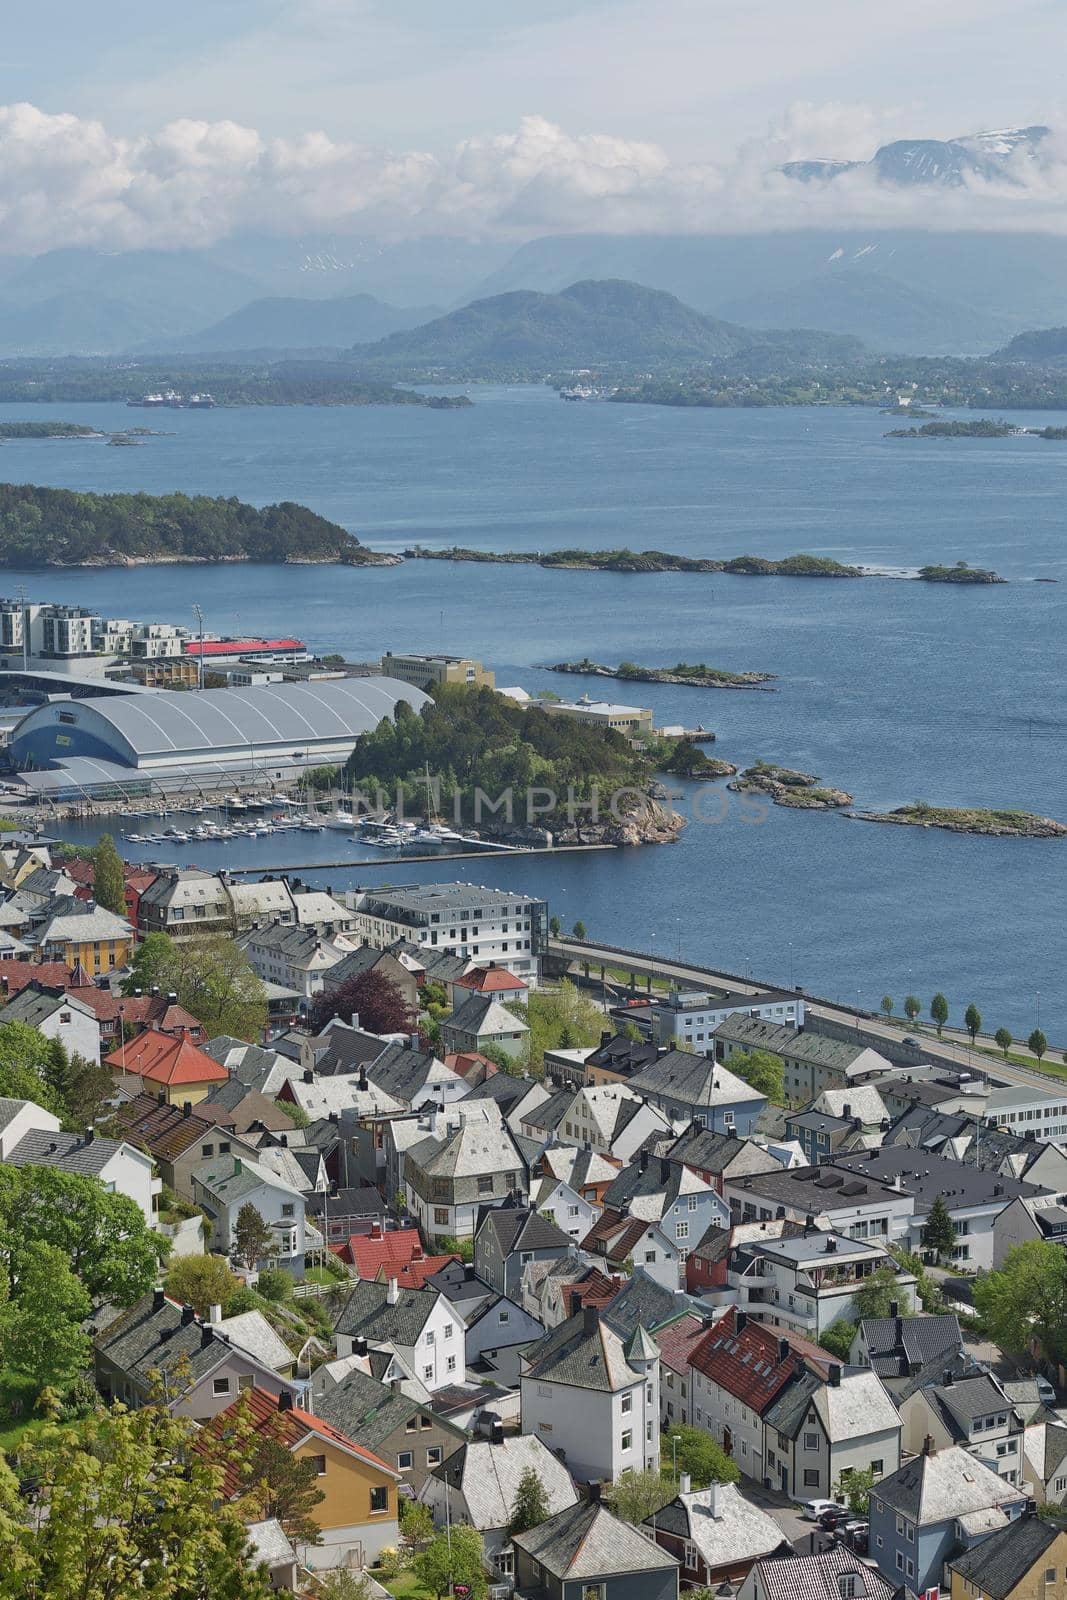 The bird's eye view of Alesund port town on the west coast of Norway, at the entrance to the Geirangerfjord by wondry